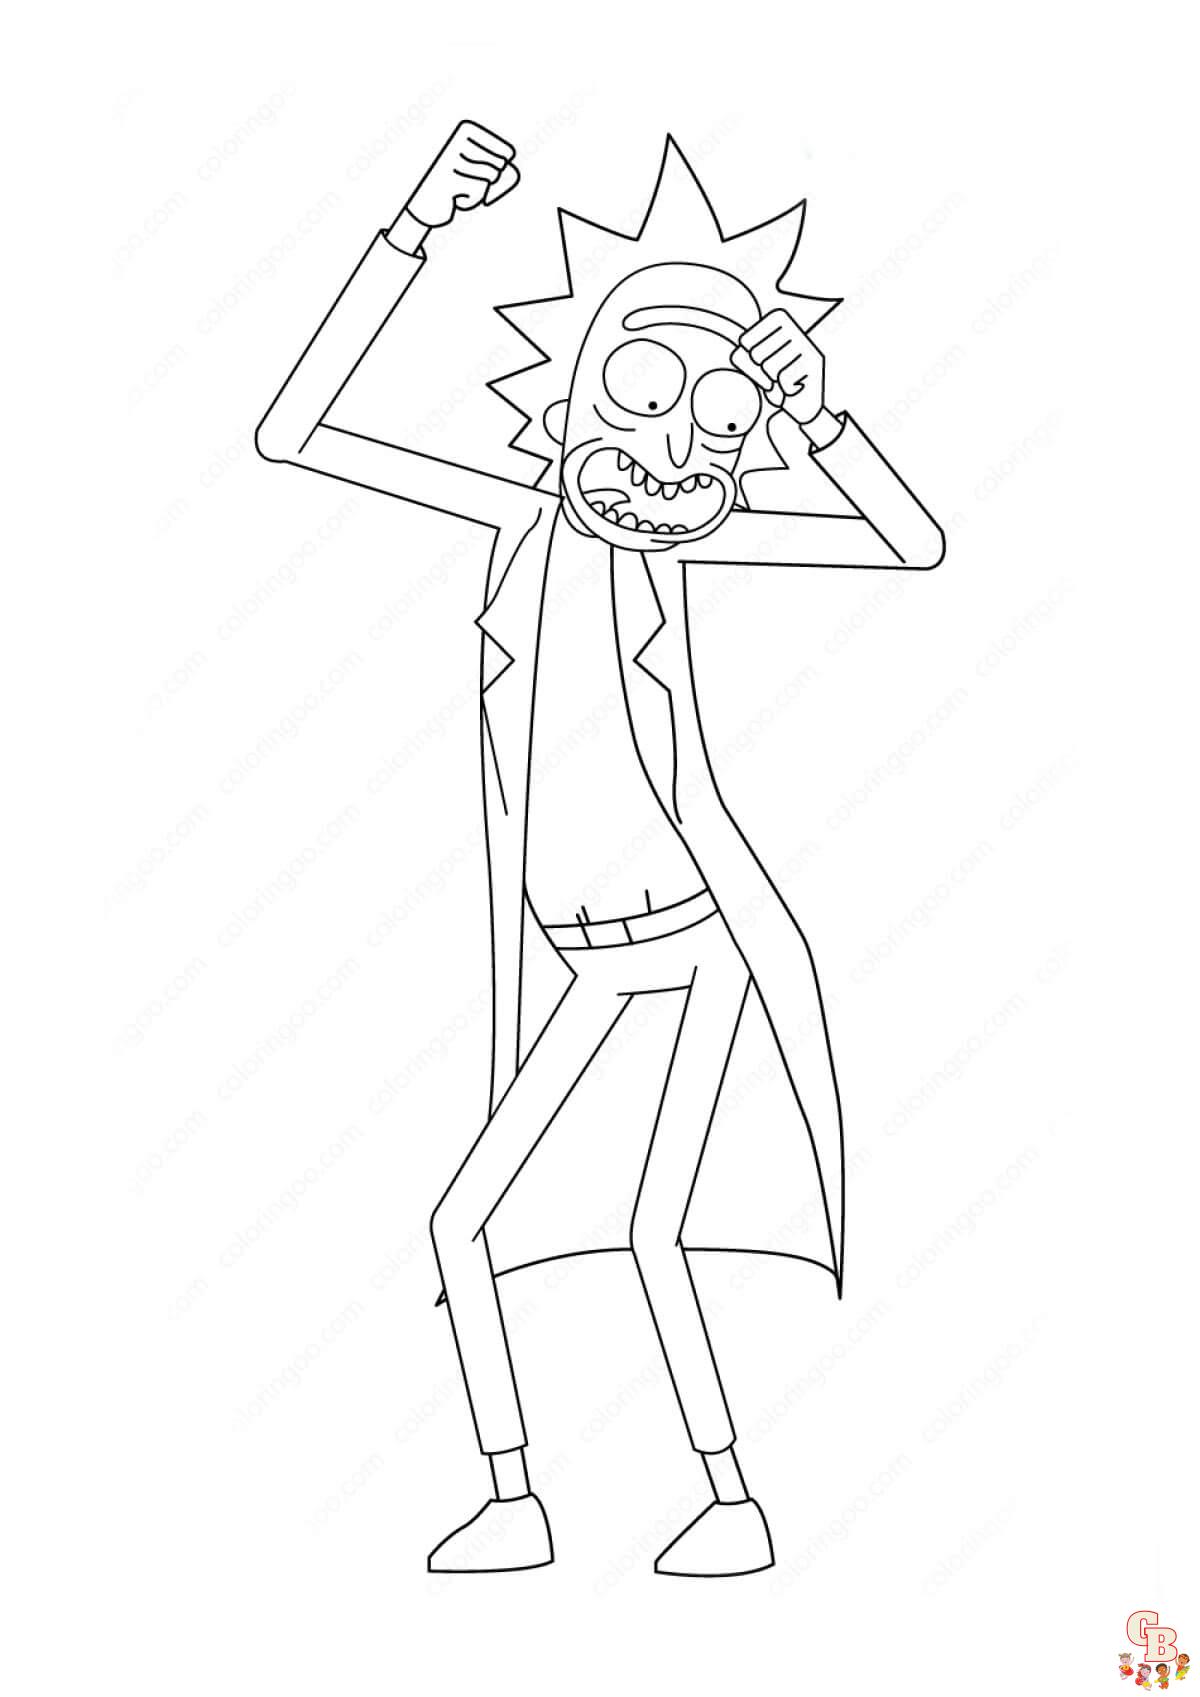 Rick and Morty Coloring Pages 4 1